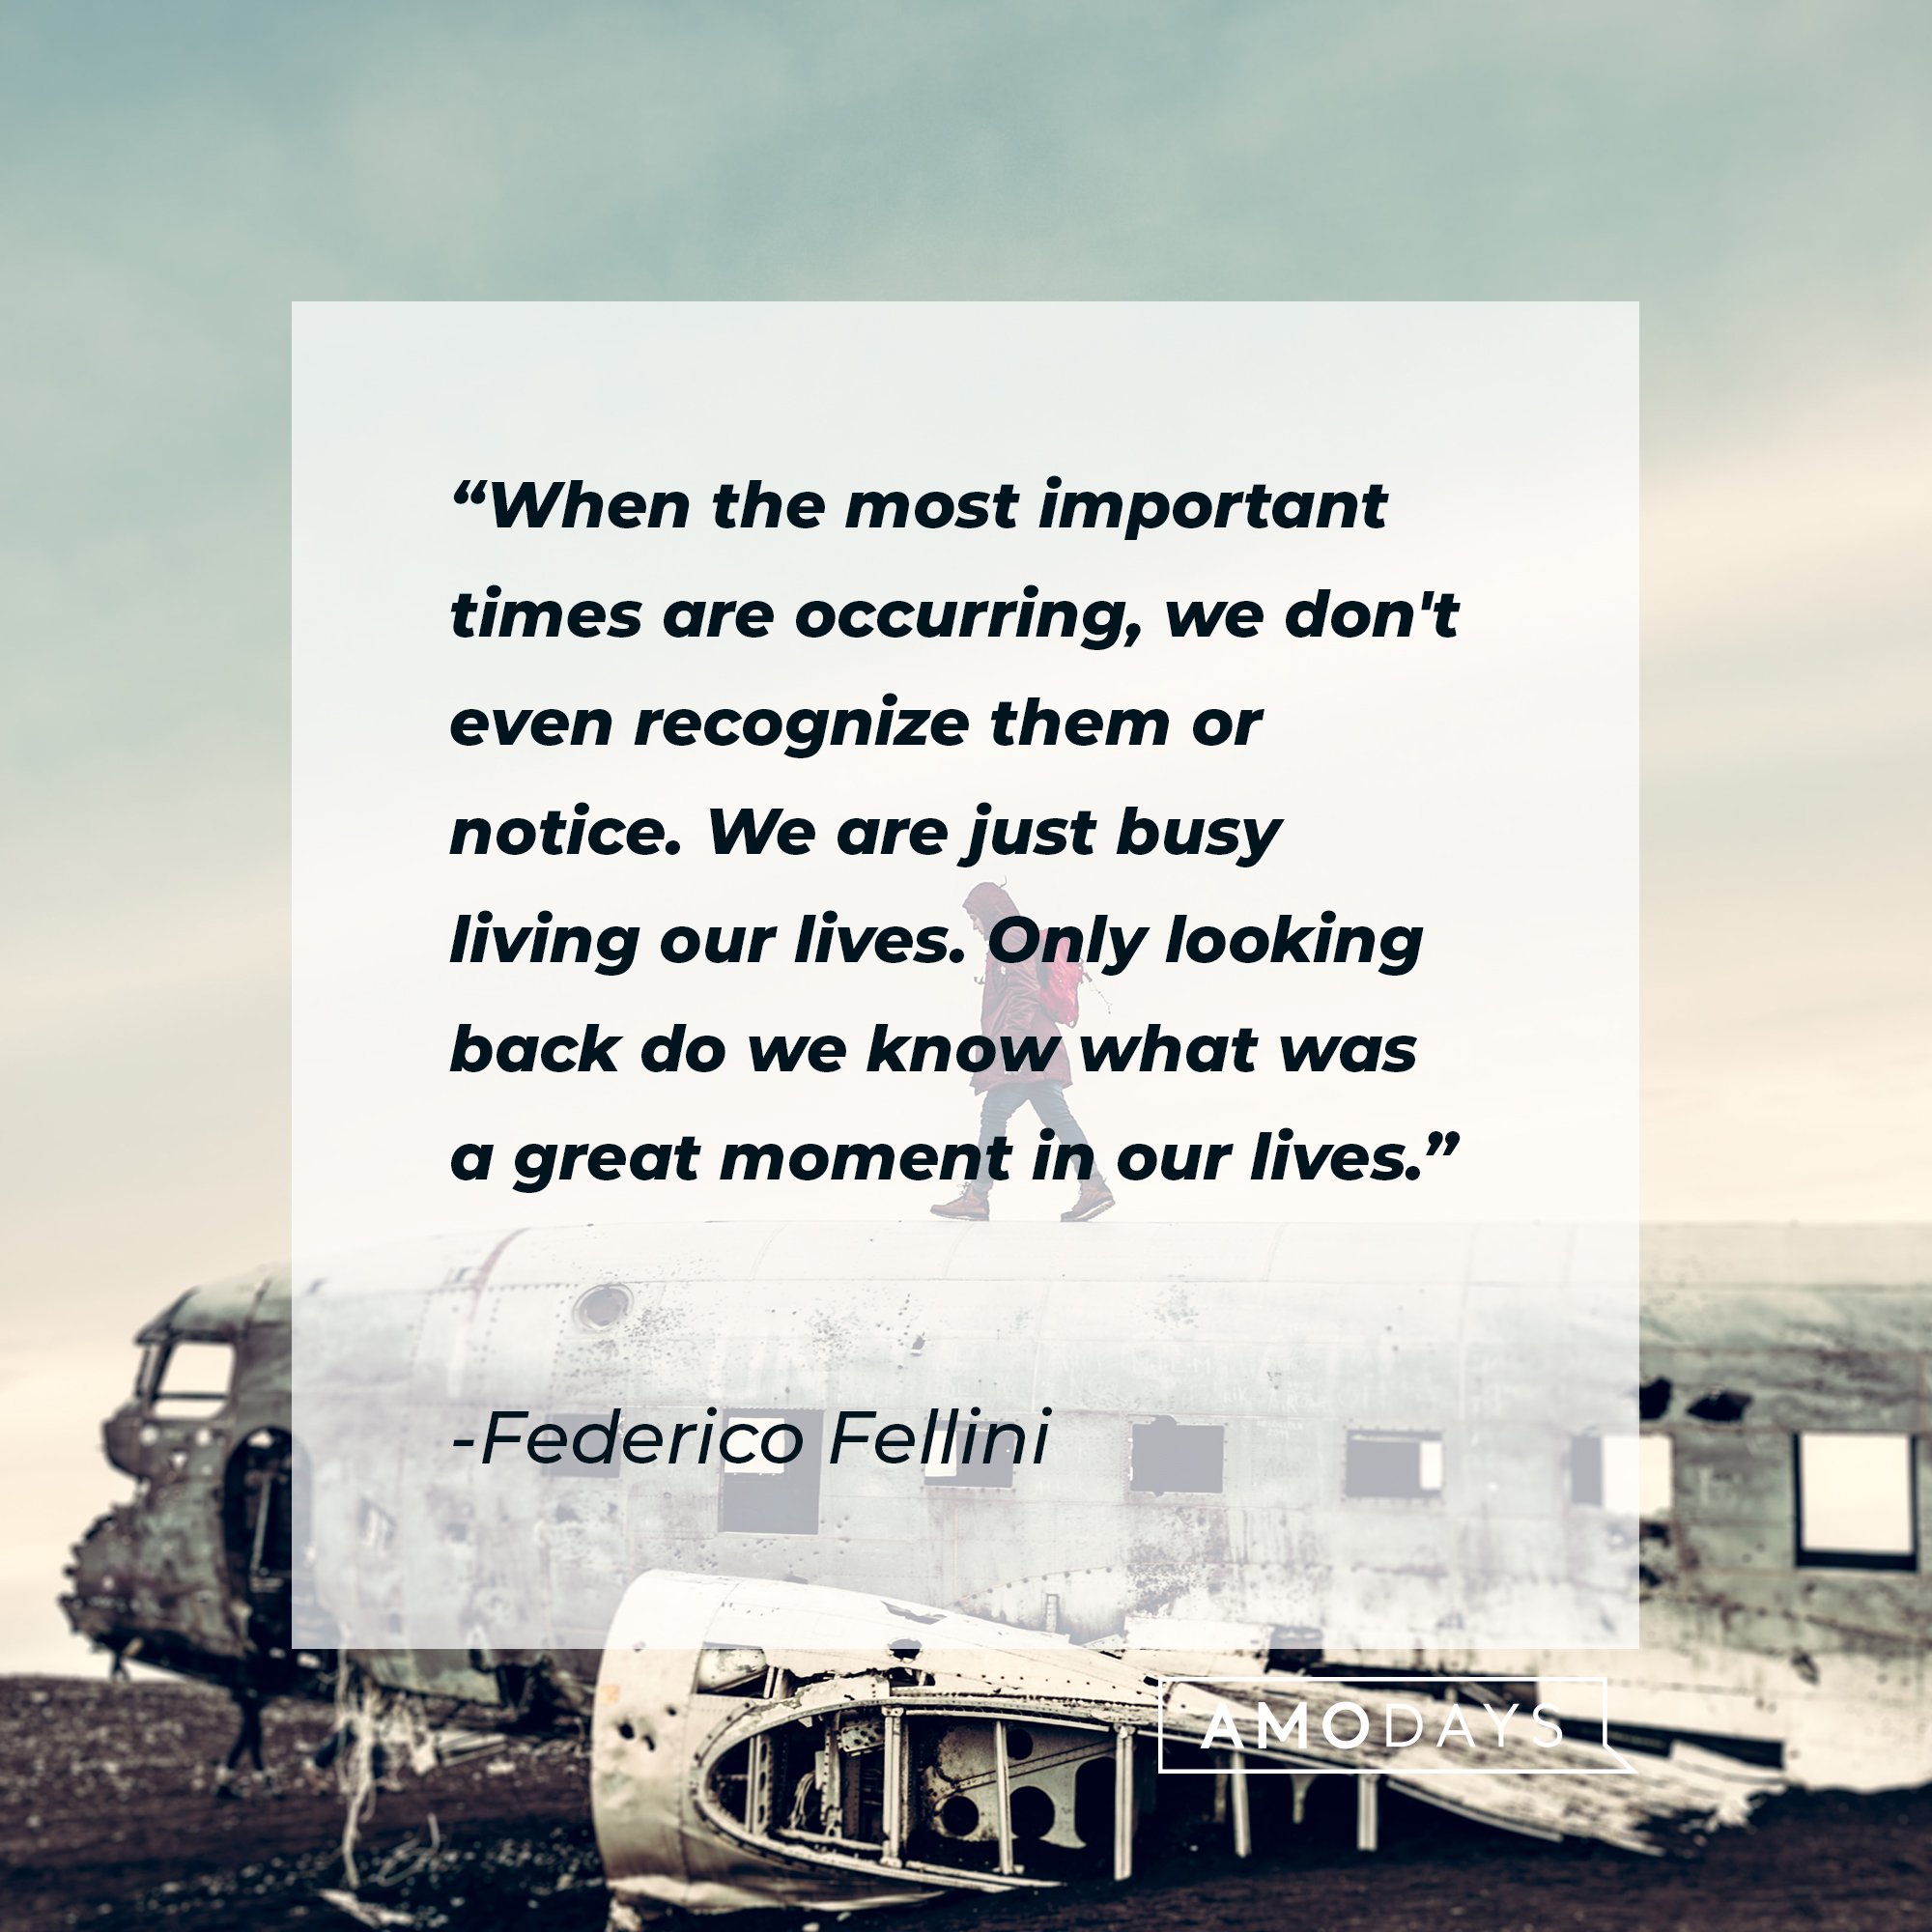 Federico Fellini’s quote: "When the most important times are occurring, we don't even recognize them or notice. We are just busy living our lives. Only looking back do we know what was a great moment in our lives." | Image: AmoDays